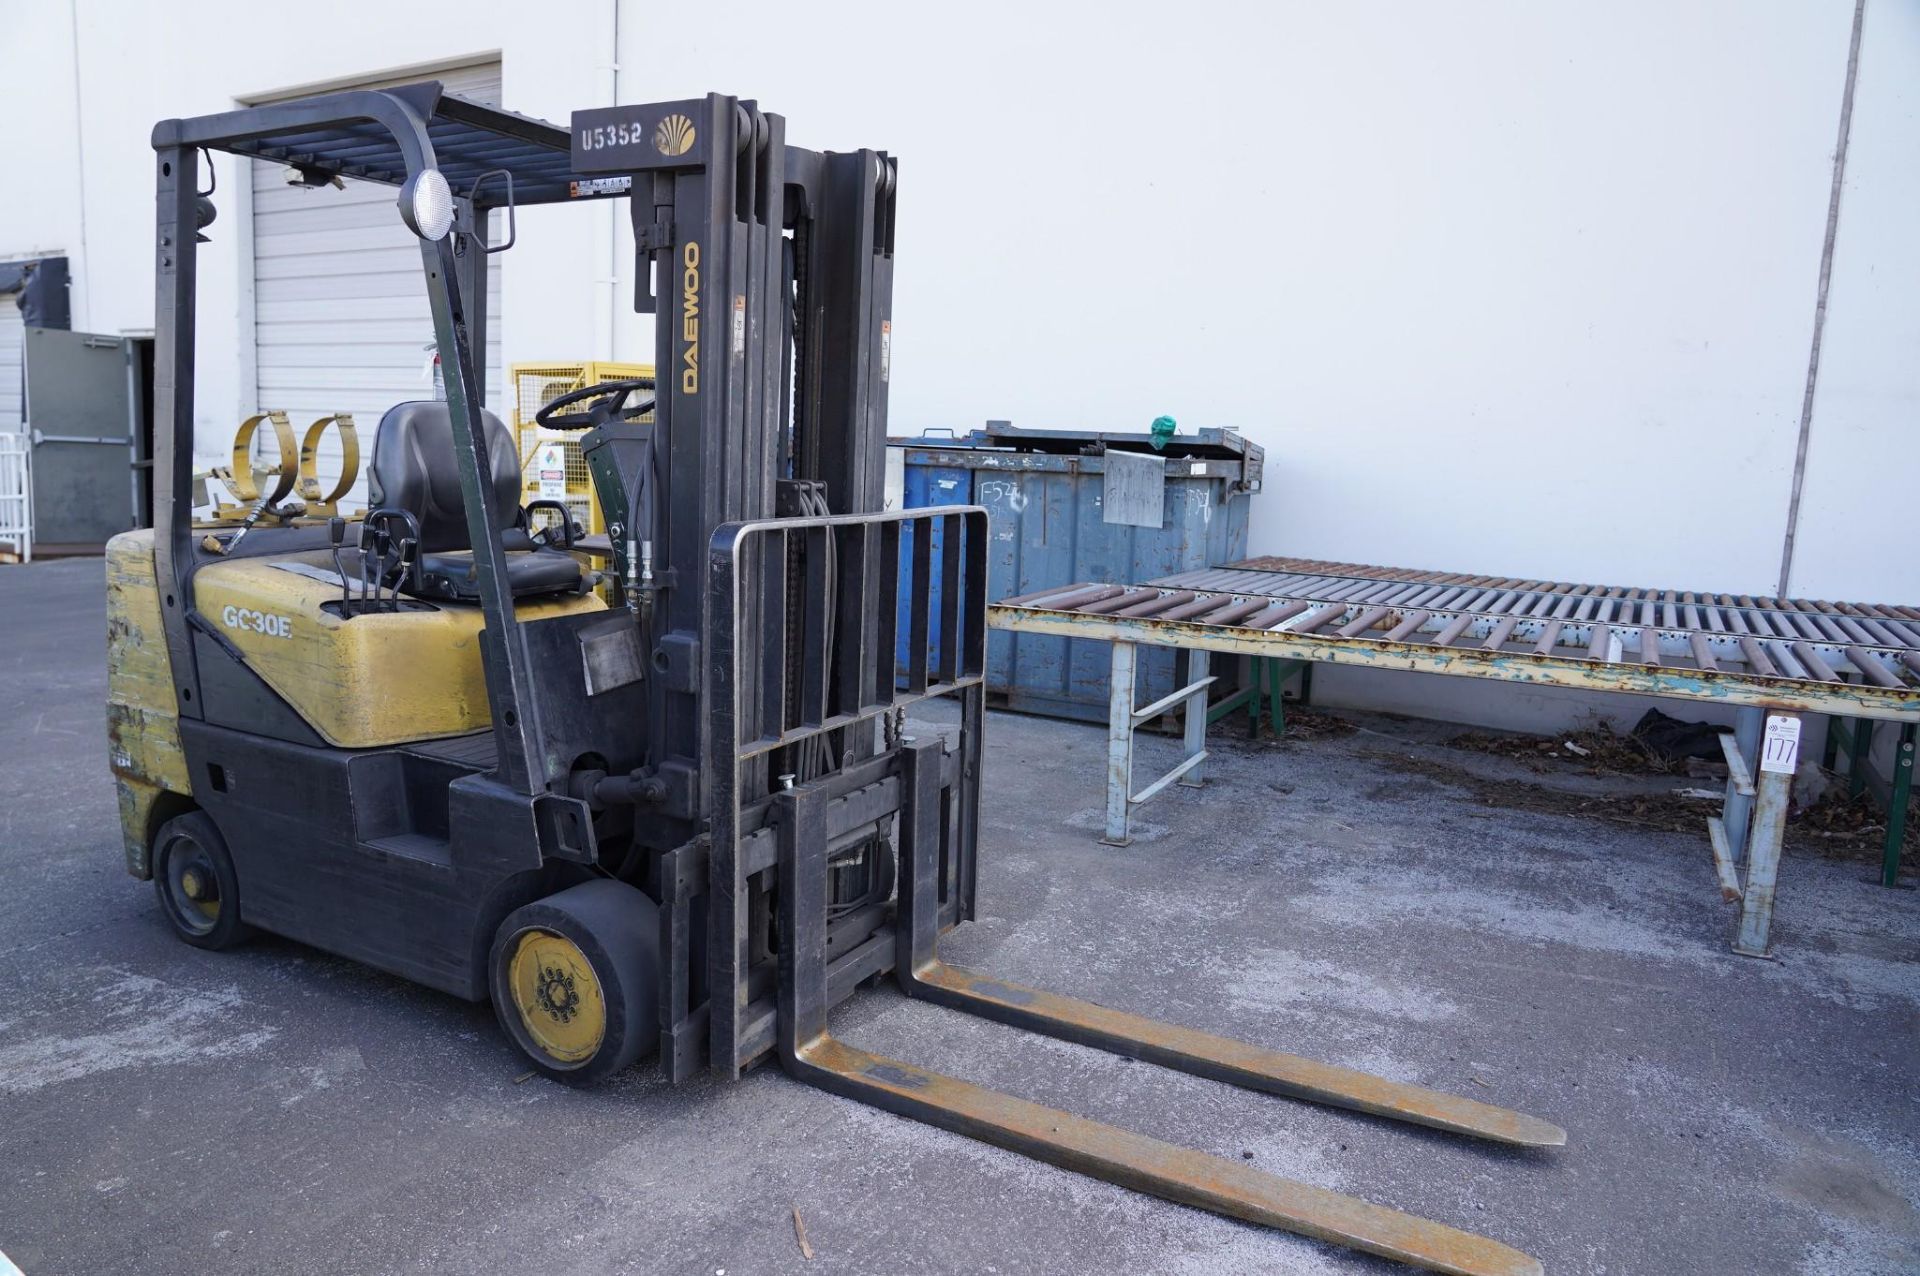 DAEWOO GC30E 5,000 LBS. CAPACITY FORKLIFT - Image 4 of 14